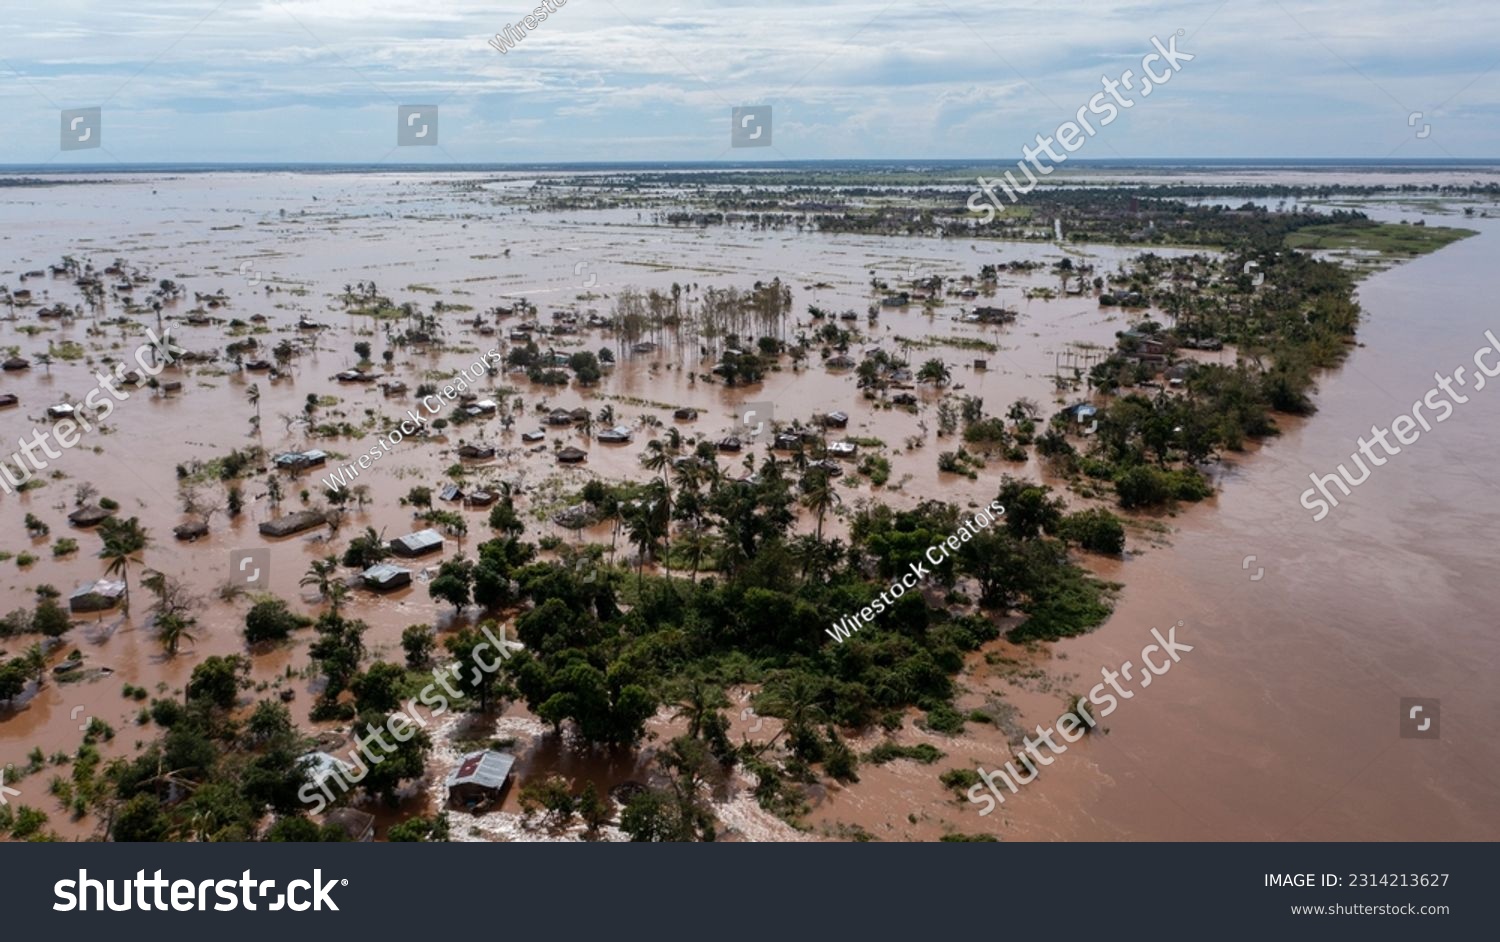 A big flood with trees and a village in the dirty waters in Africa #2314213627